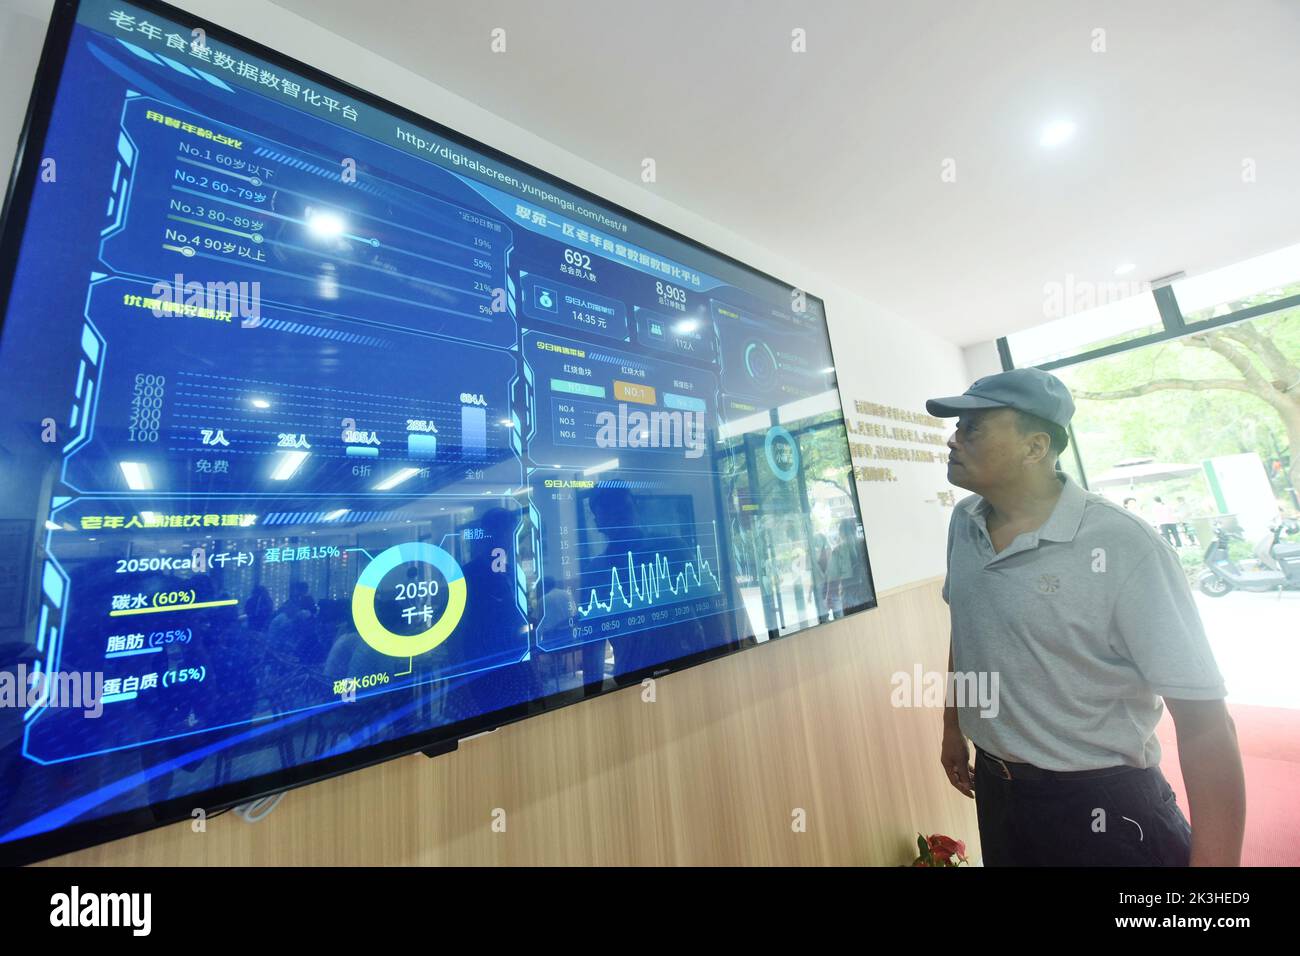 HANGZHOU, CHINA - SEPTEMBER 27, 2022 - An elderly man looks at suggestions on healthy eating for the elderly on the digital intelligence platform of a Stock Photo